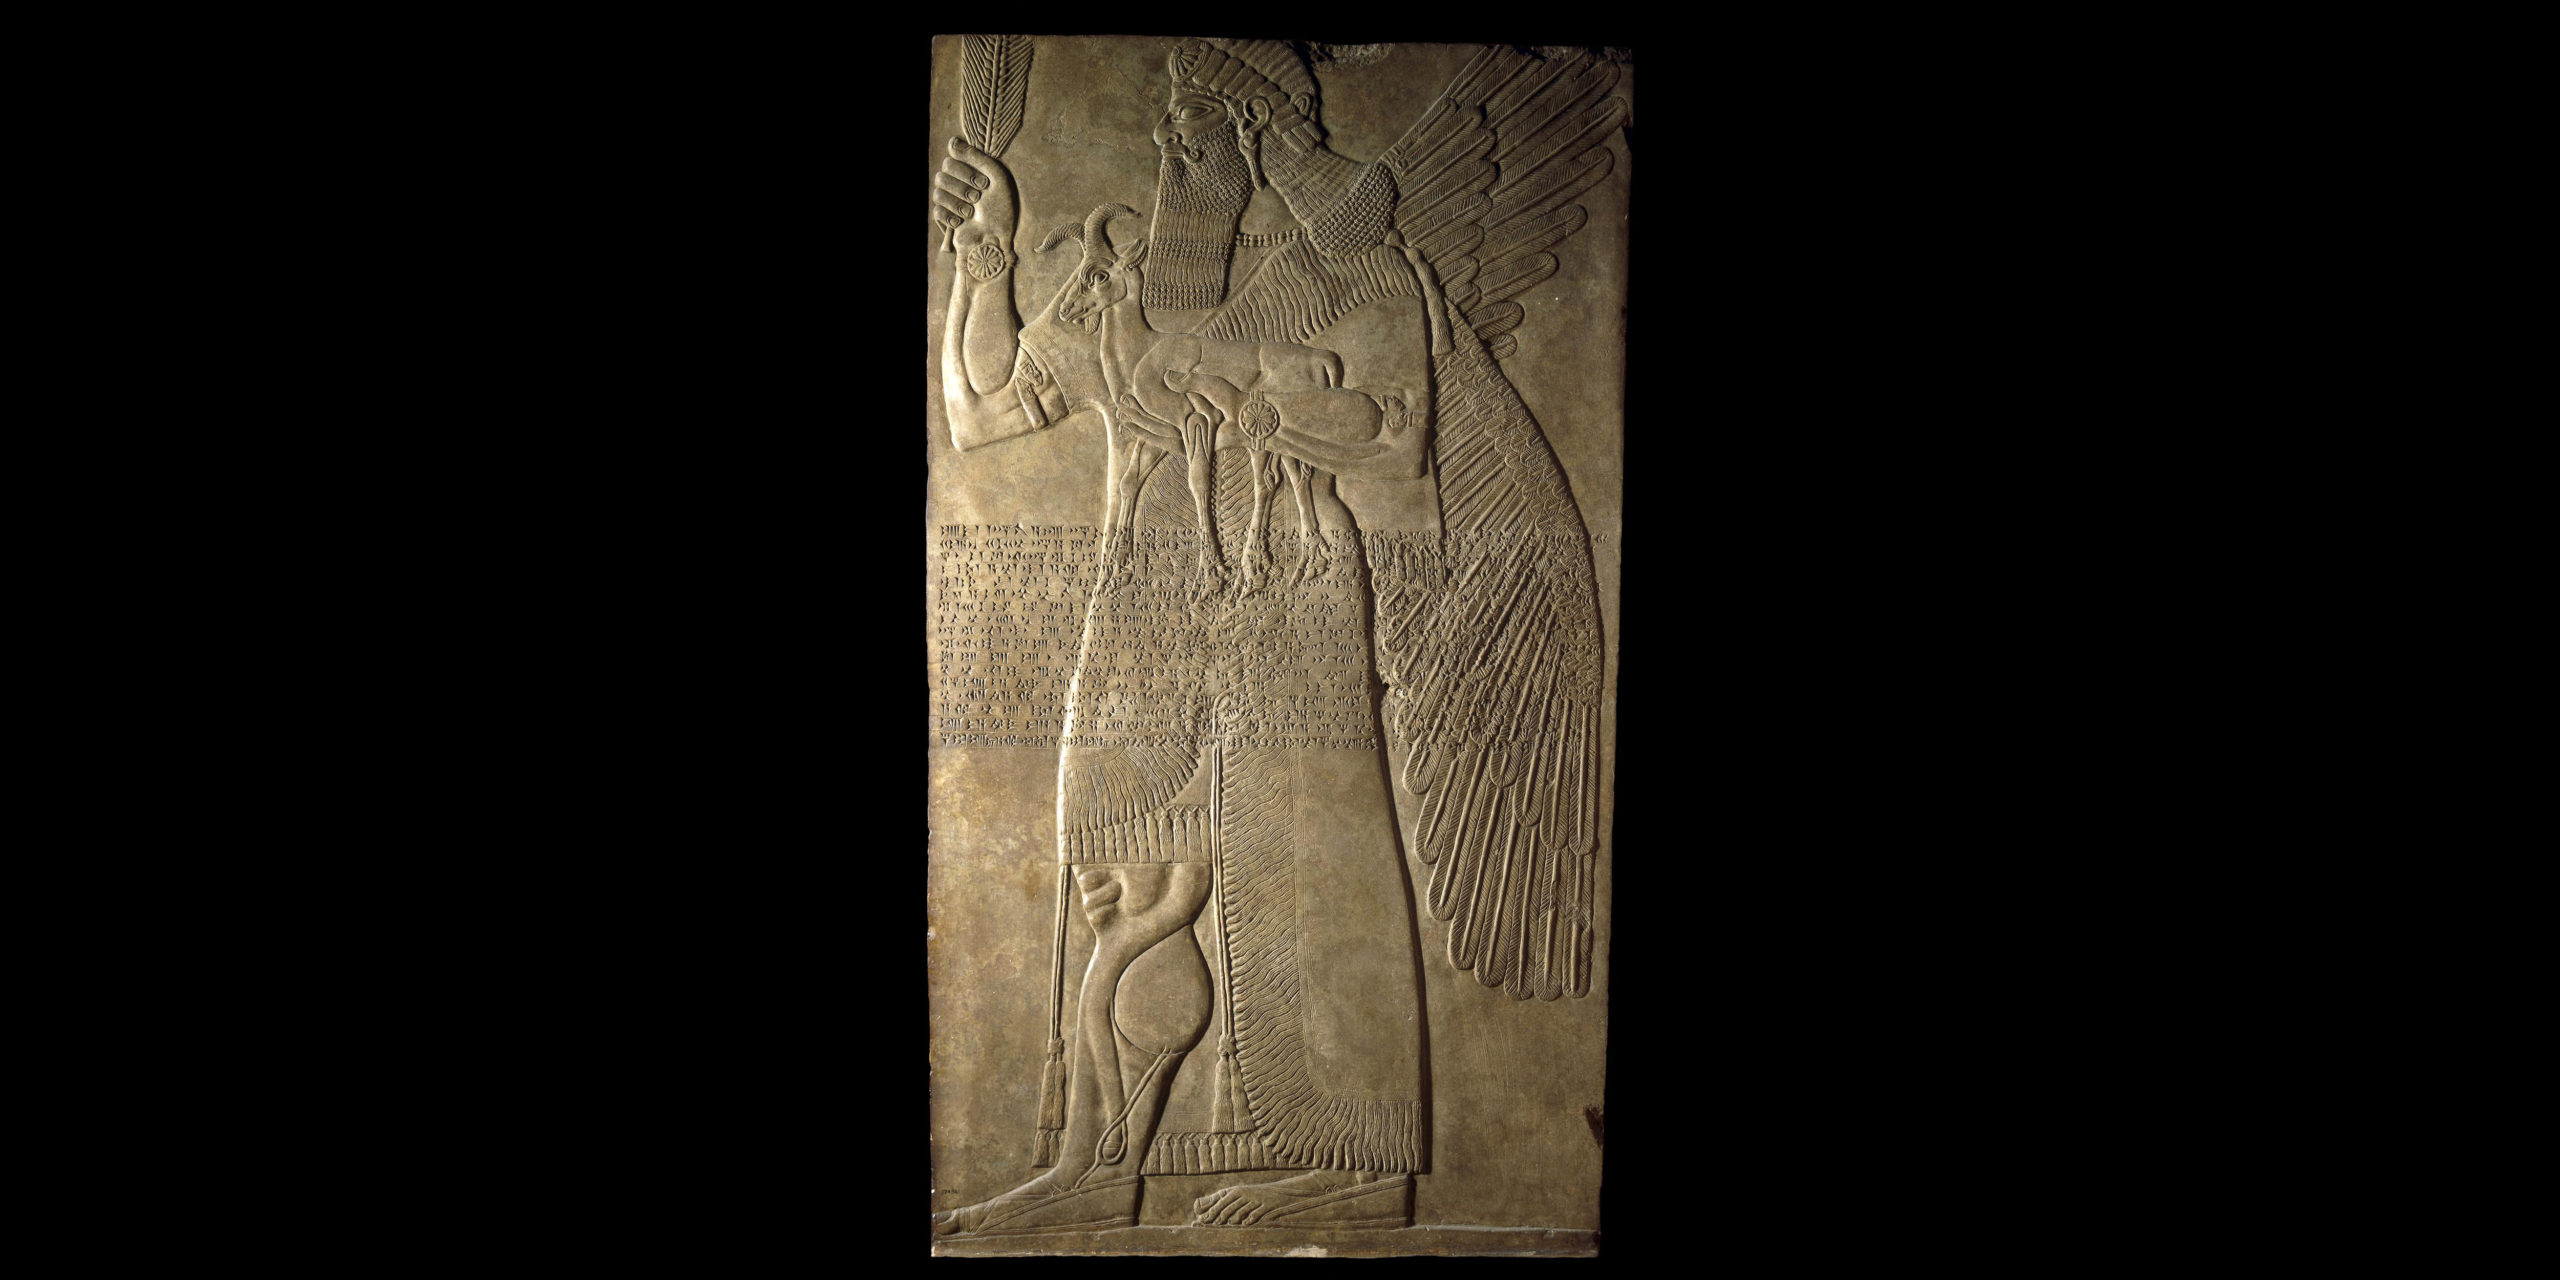 Protective Spirit Relief from the North-West Palace of Ashurnasirpal II, 883-859 B.C.E., Neo-Assyrian, alabaster, 224 x 127 x 12 cm (extant), Nimrud (ancient Kalhu), northern Iraq © Trustees of the British Museum. One of a pair which guarded an entrance into the private apartments of Ashurnasirpal II. The figure of a man with wings may be the supernatural creature called an apkallu in cuneiform texts. He wears a tasselled kilt and a fringed and embroidered robe. His curled moustache, long hair and beard are typical of figures of this date. Across the body runs Ashurnasirpal's "Standard Inscription," which records some of the king's titles.